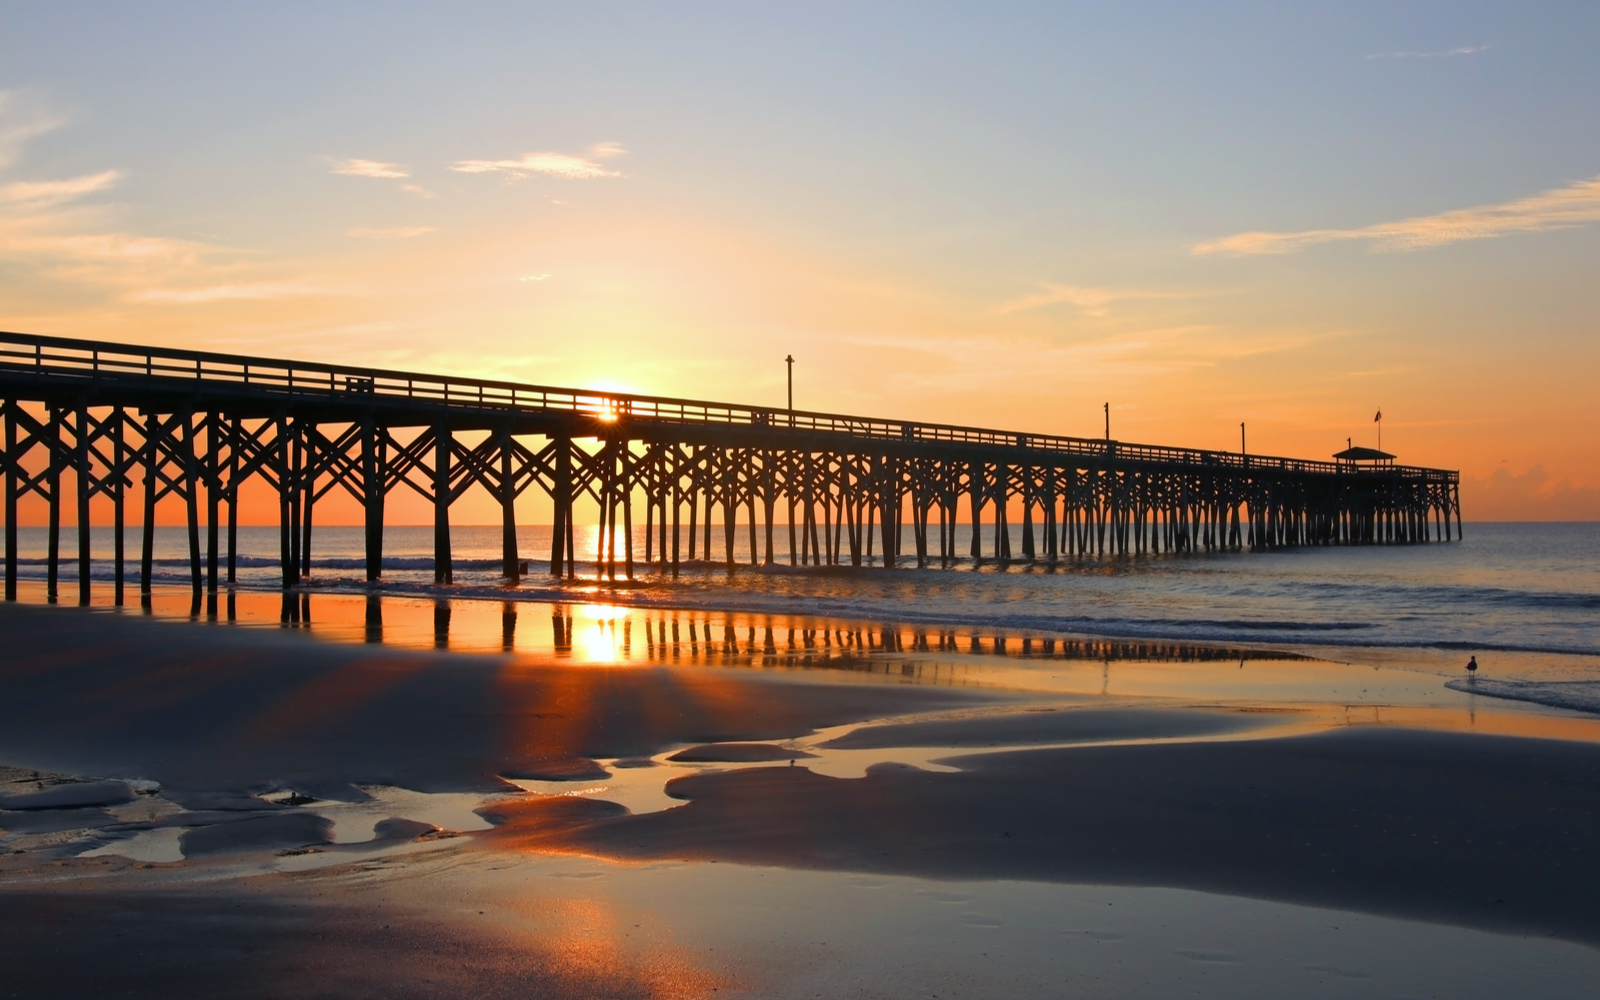 15 Best Things to Do in Myrtle Beach in 2023